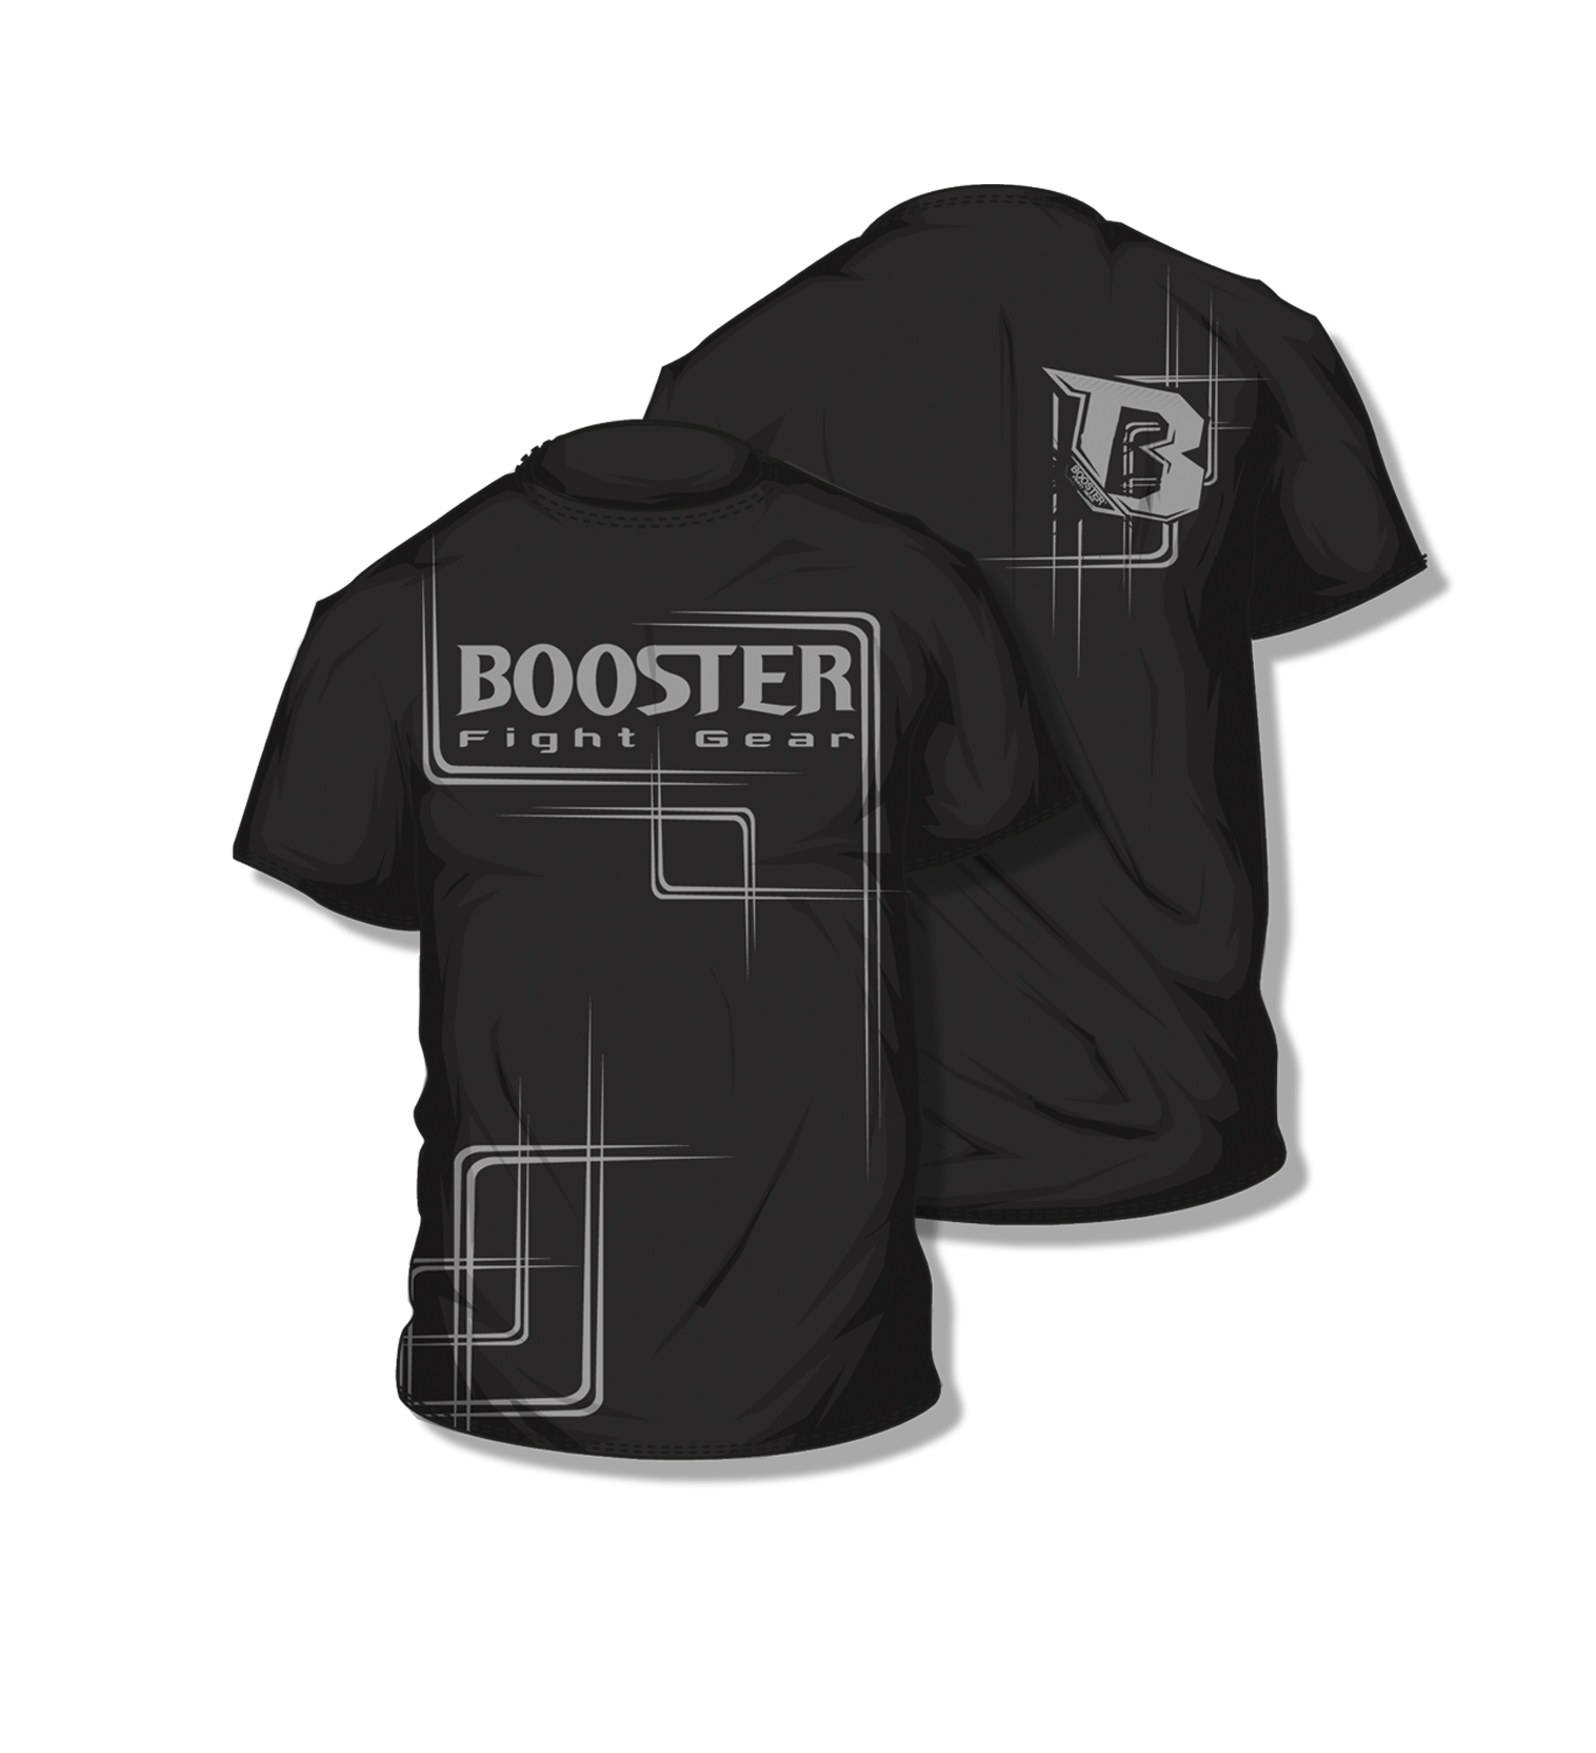 Booster  BC Walk out shirt black - S